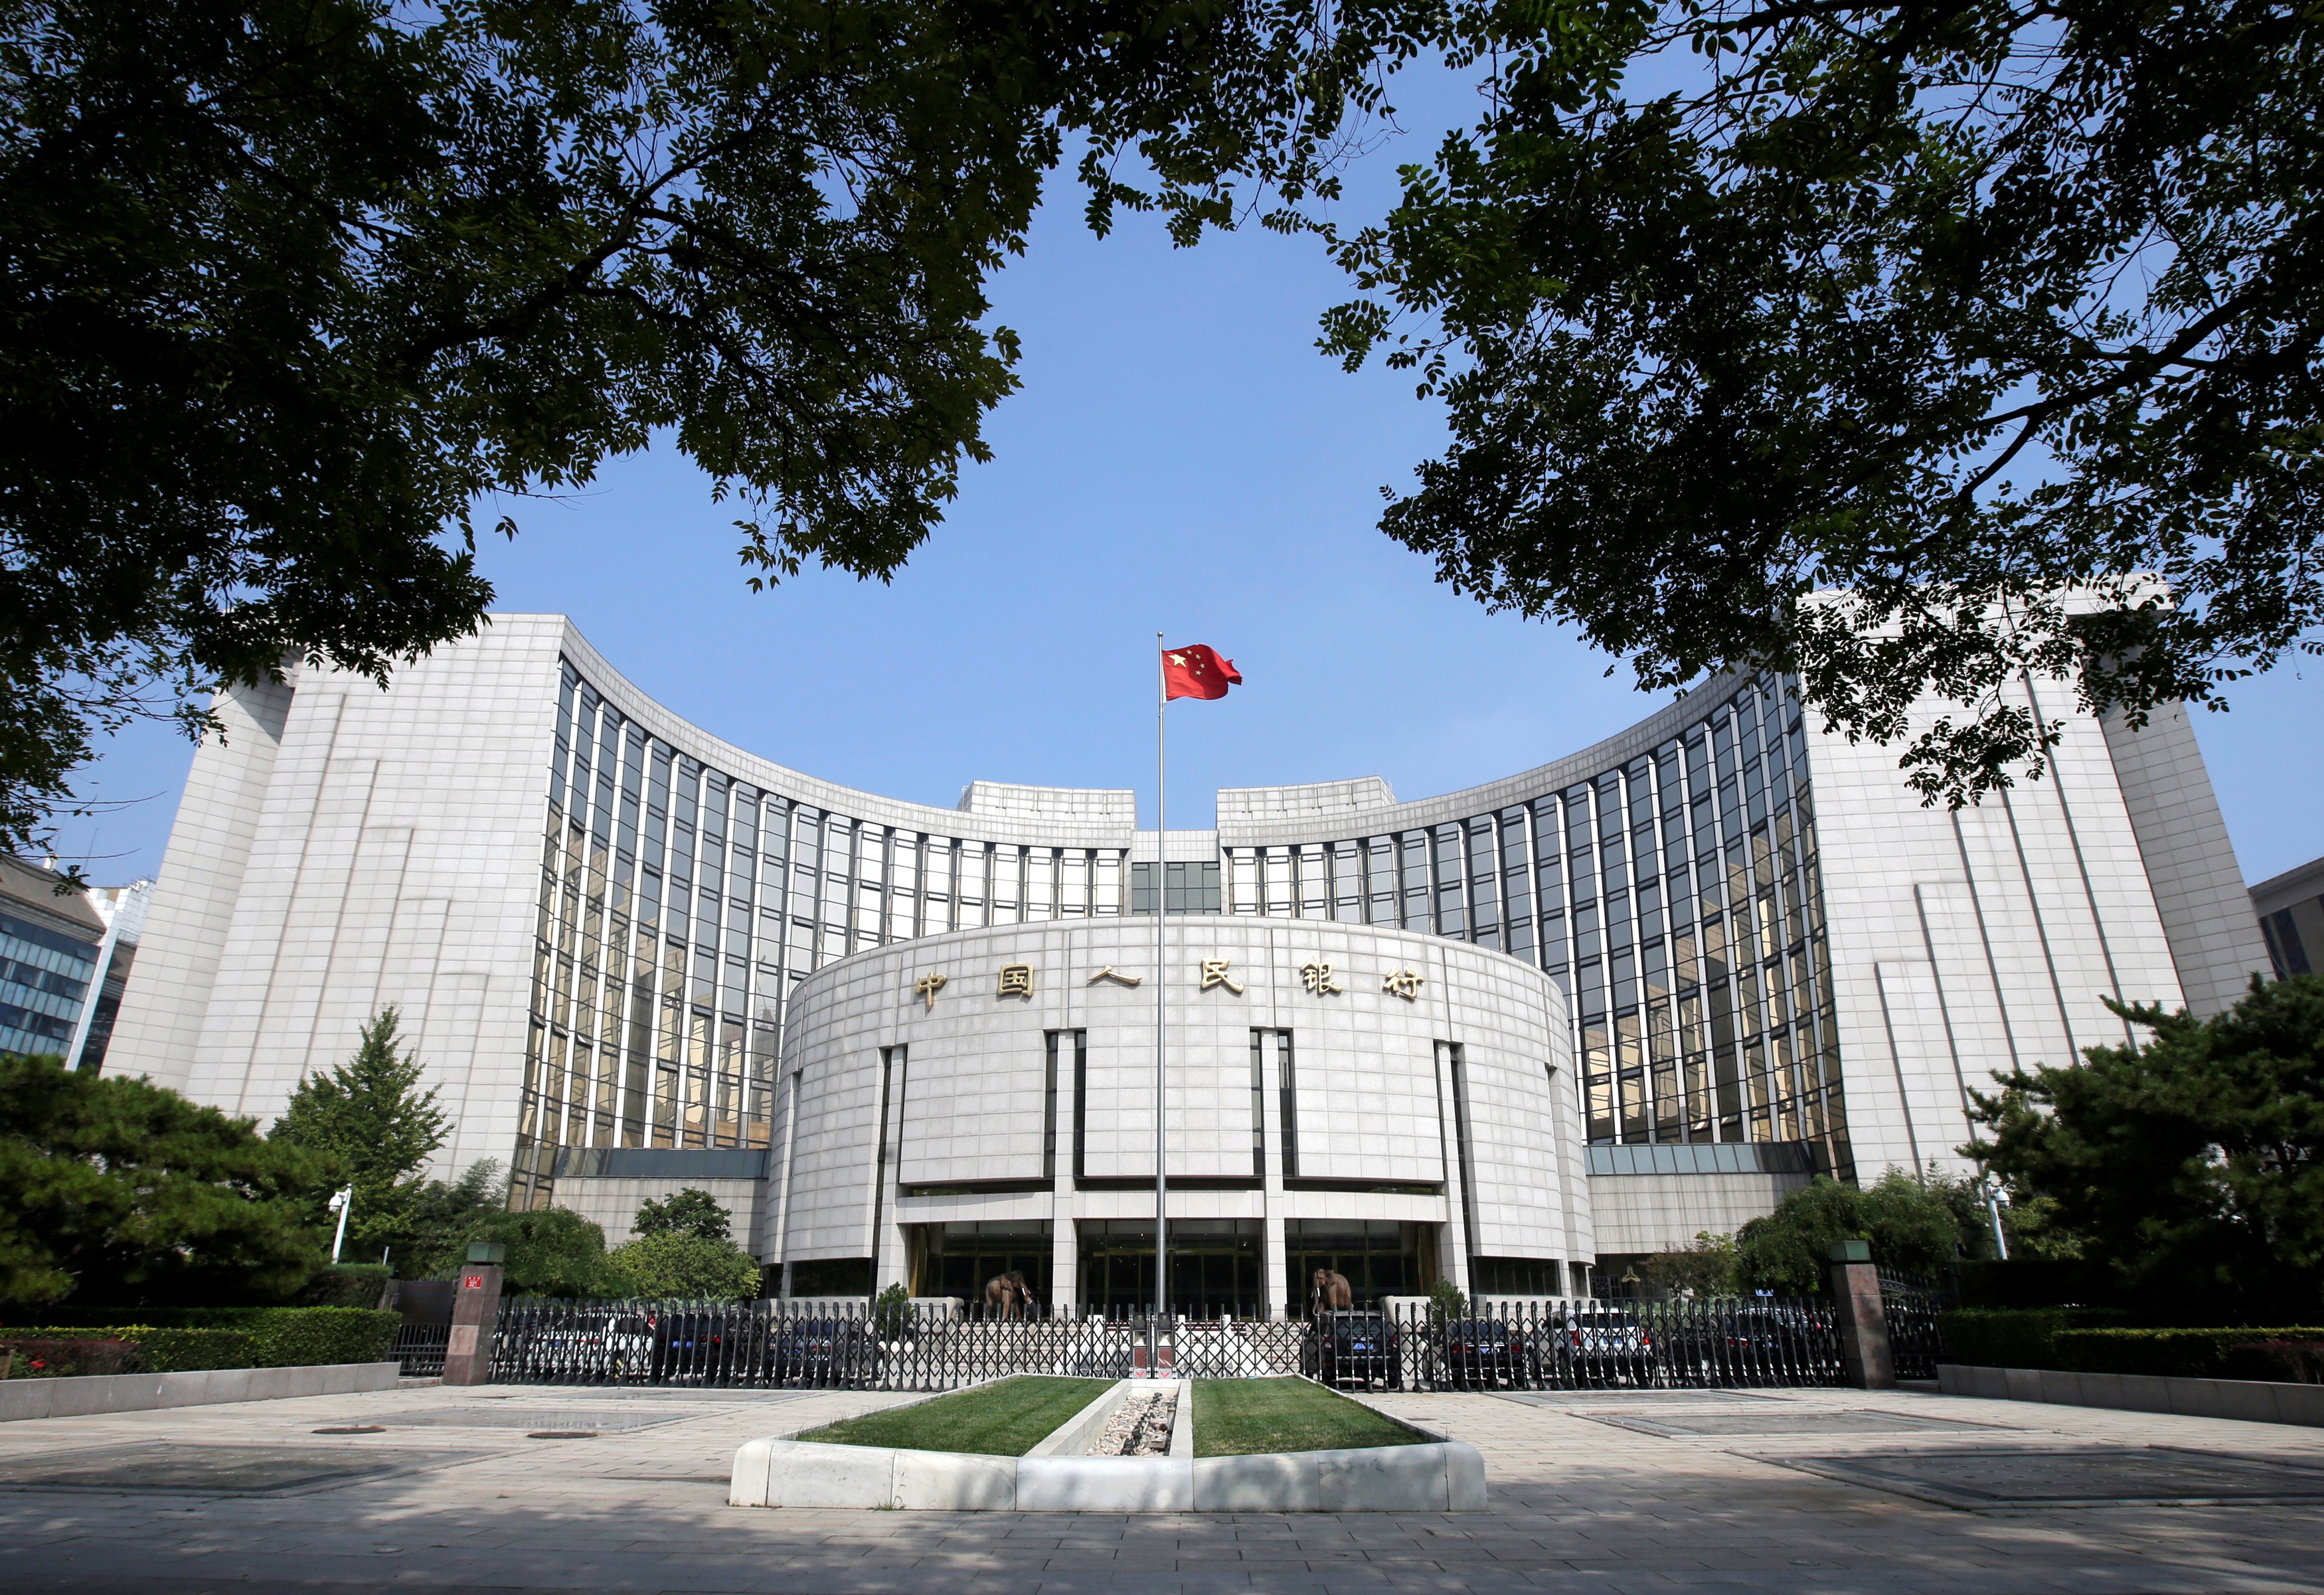 Investors should not expect the People’s Bank of China to introduce broad easing or massive monetary stimulus. Photo: Reuters